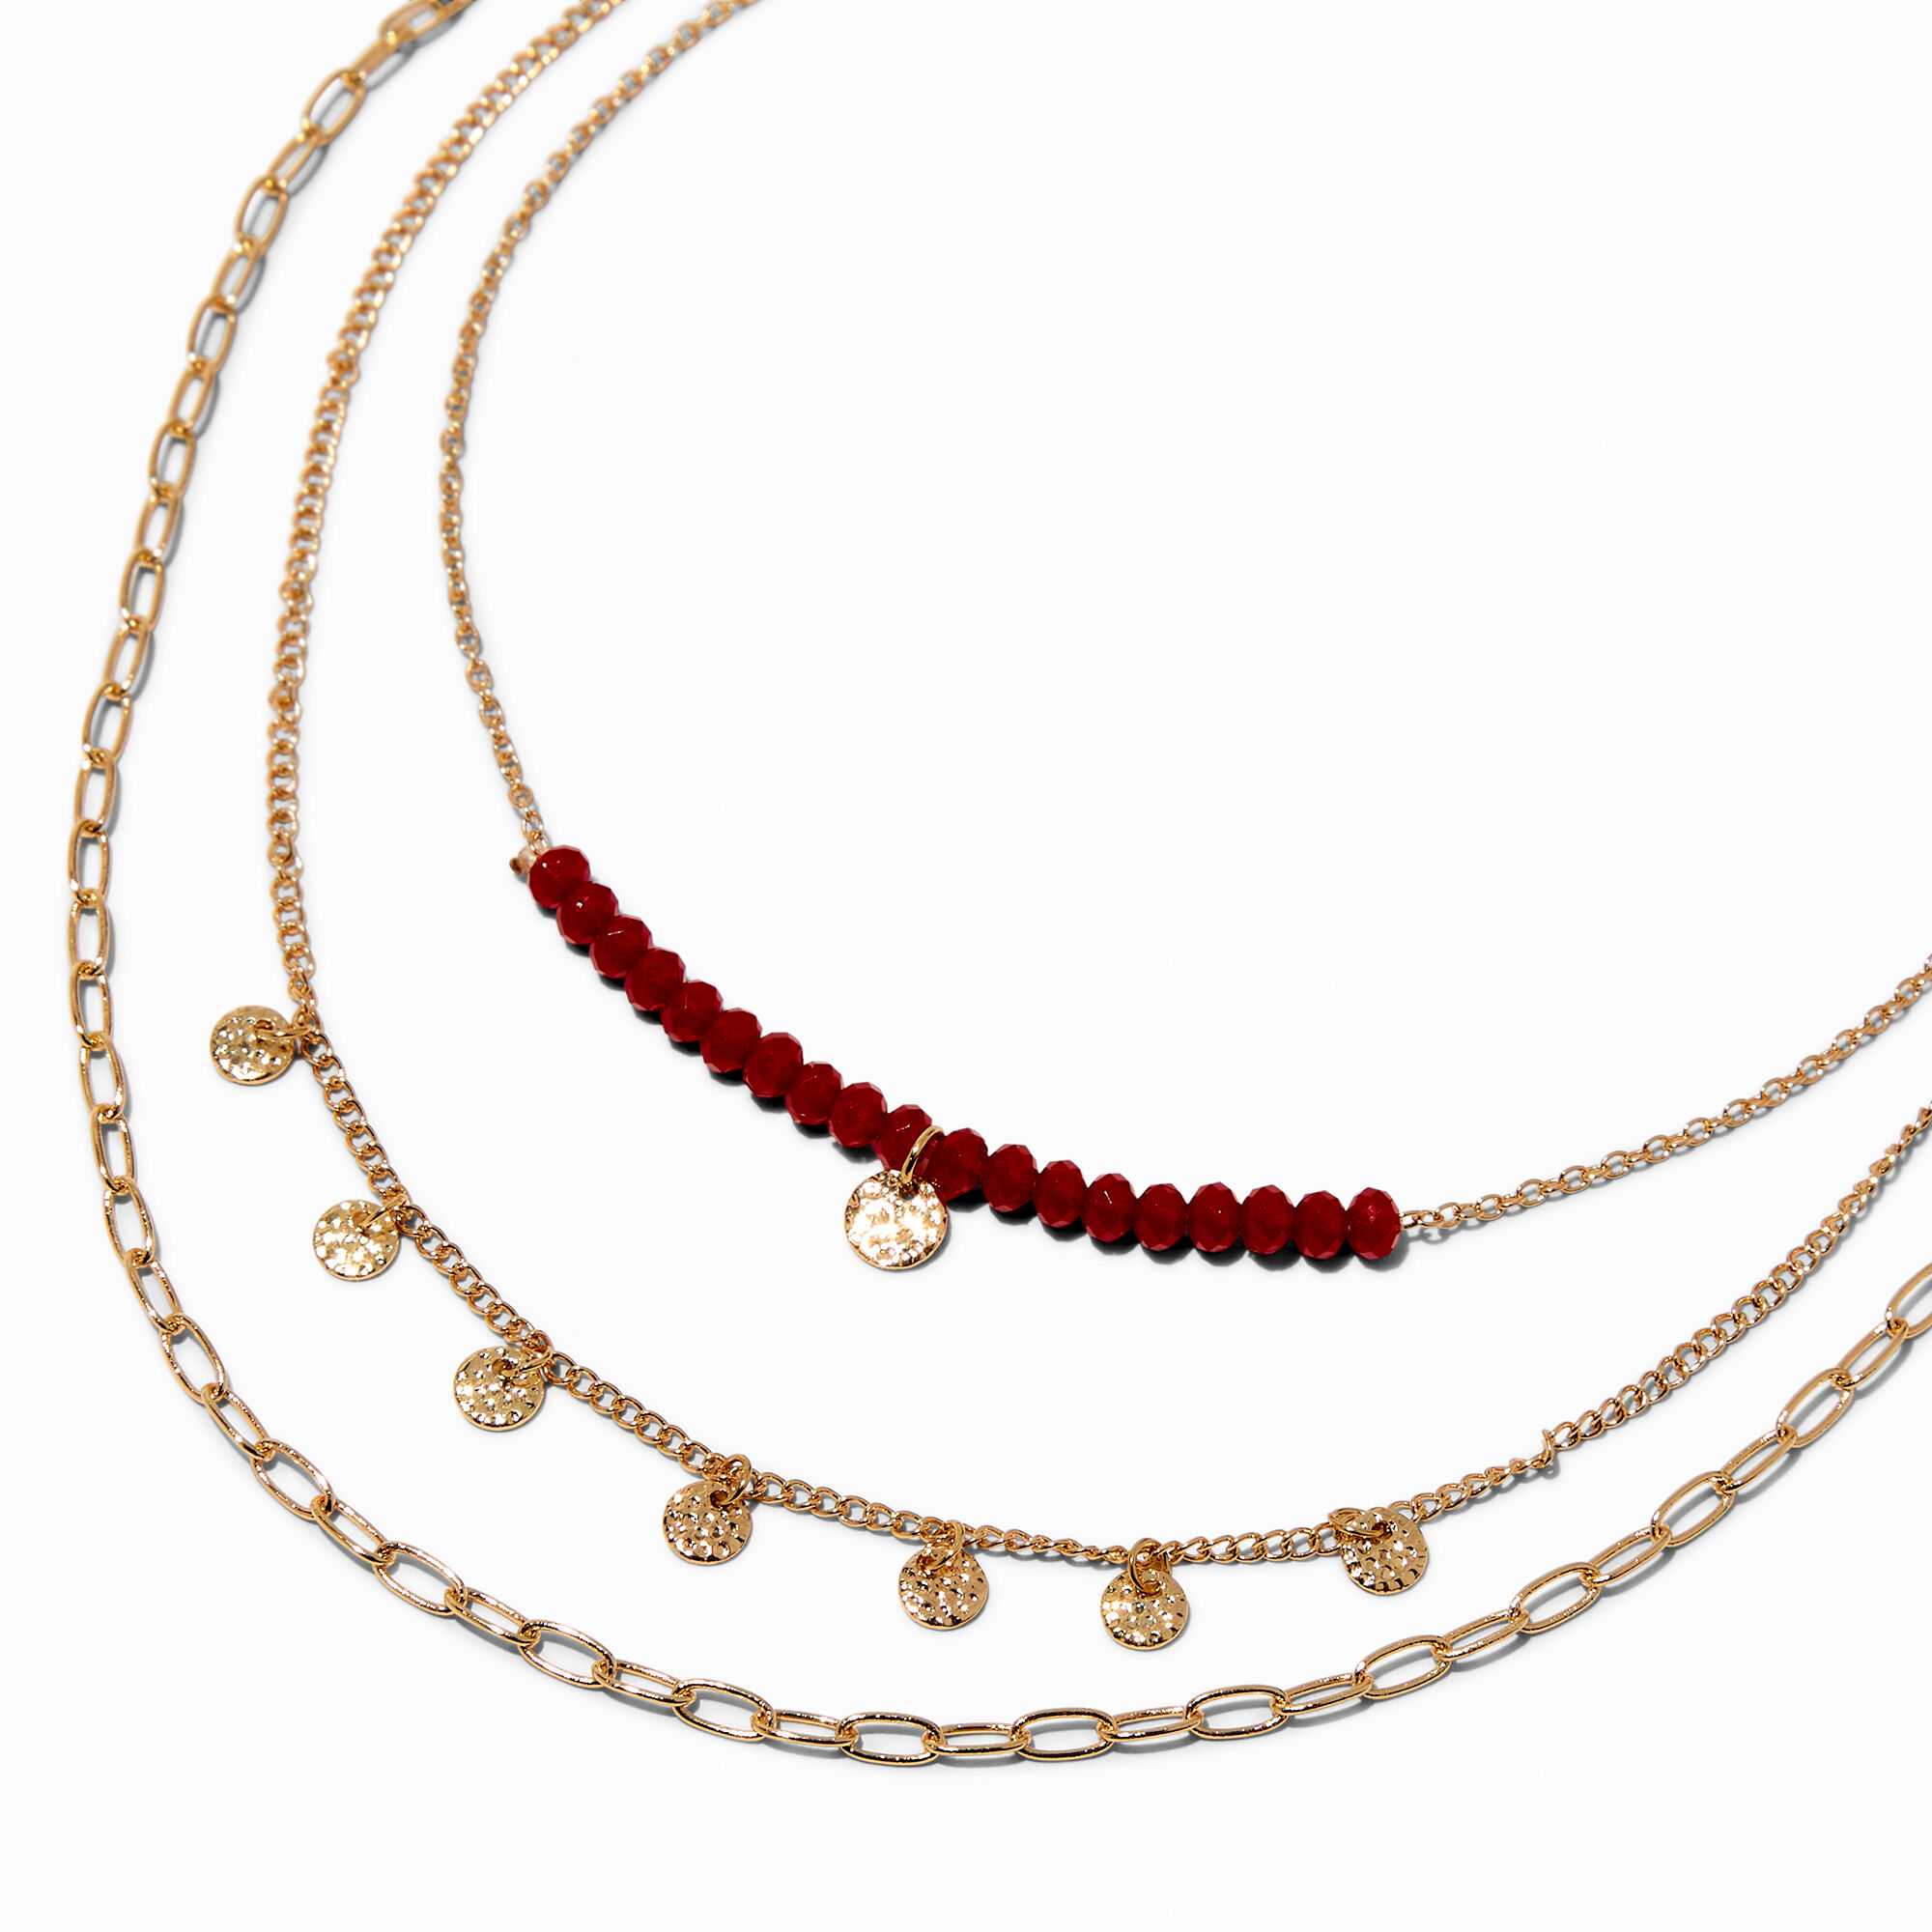 View Claires Bead GoldTone MultiStrand Necklace Burgundy information